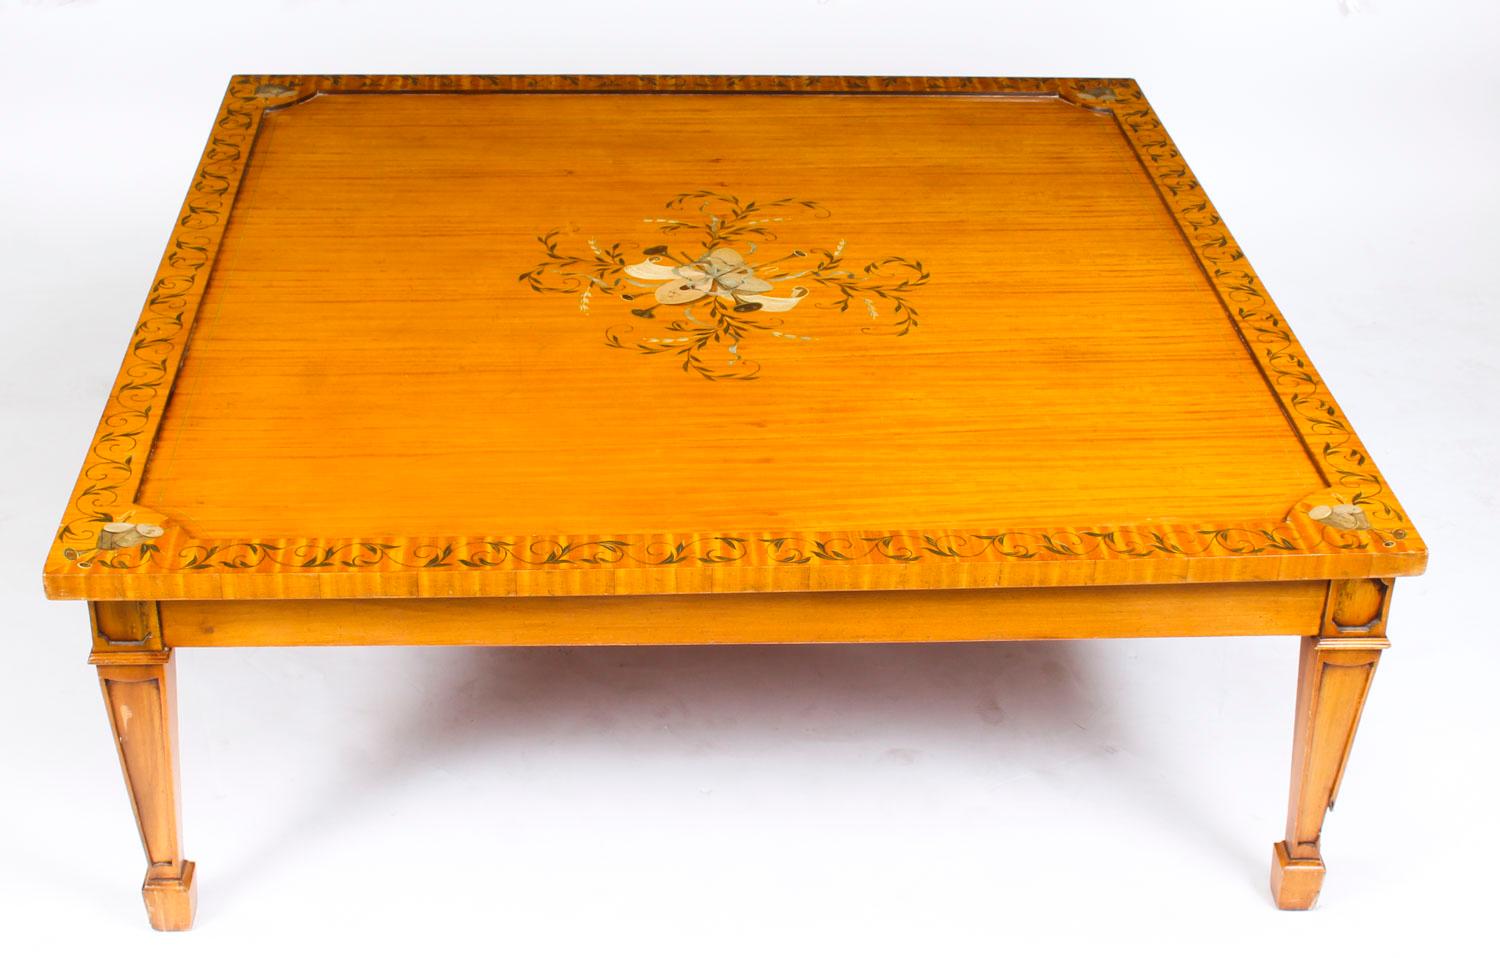 This is a large superb satinwood Sheraton Revival coffee table, mid-20th century in date.

The square table top features painted decoration in the manner of Angelica Kauffman, featuring trophies and musical instruments with a foliage and foliate